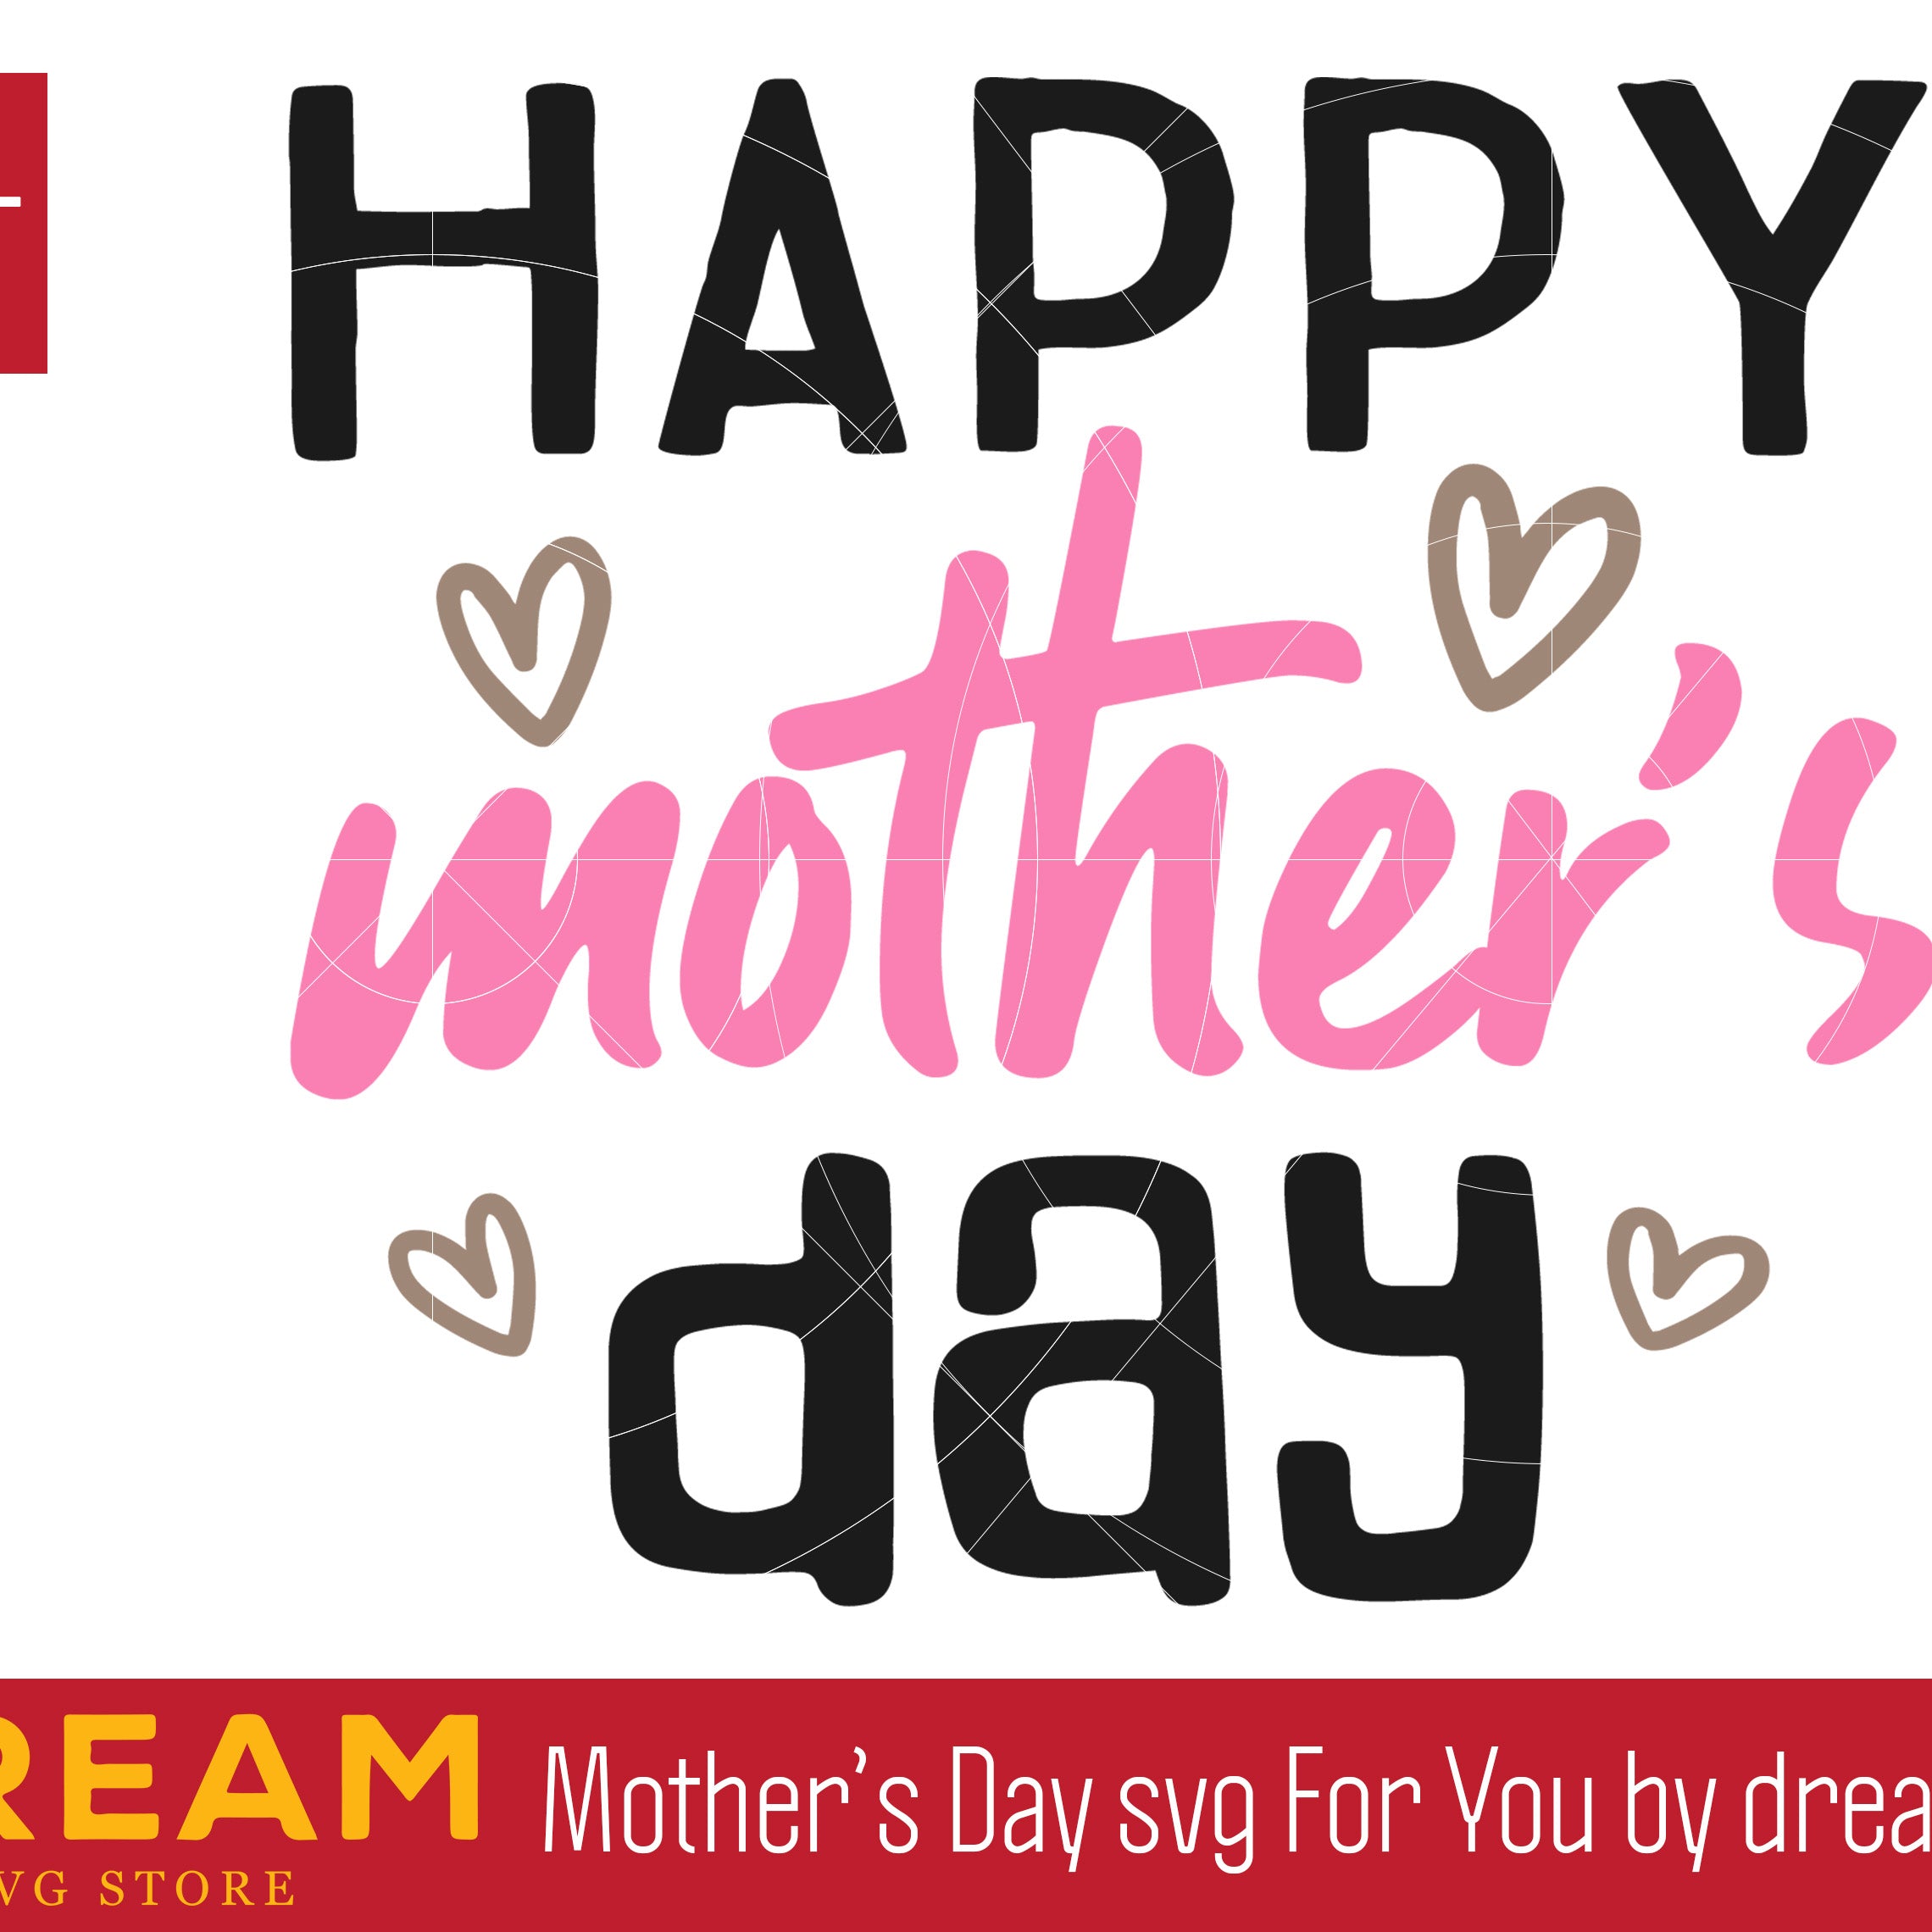 happy mothers day svg, Mother's day svg, eps, png, dxf